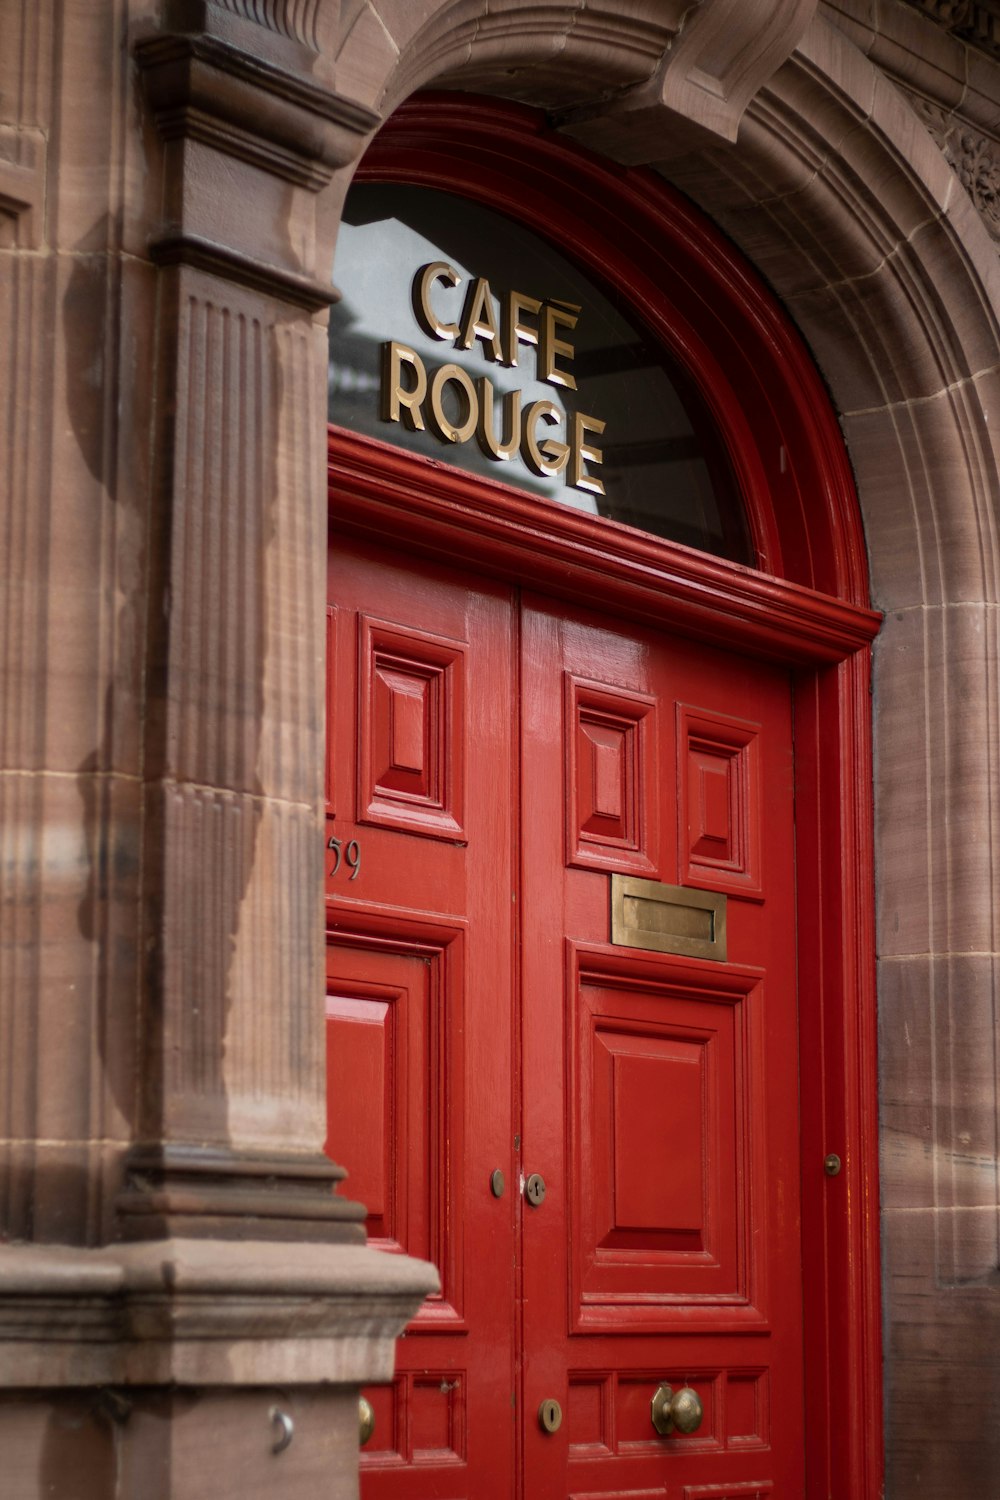 a red door with a sign that says cafe roue